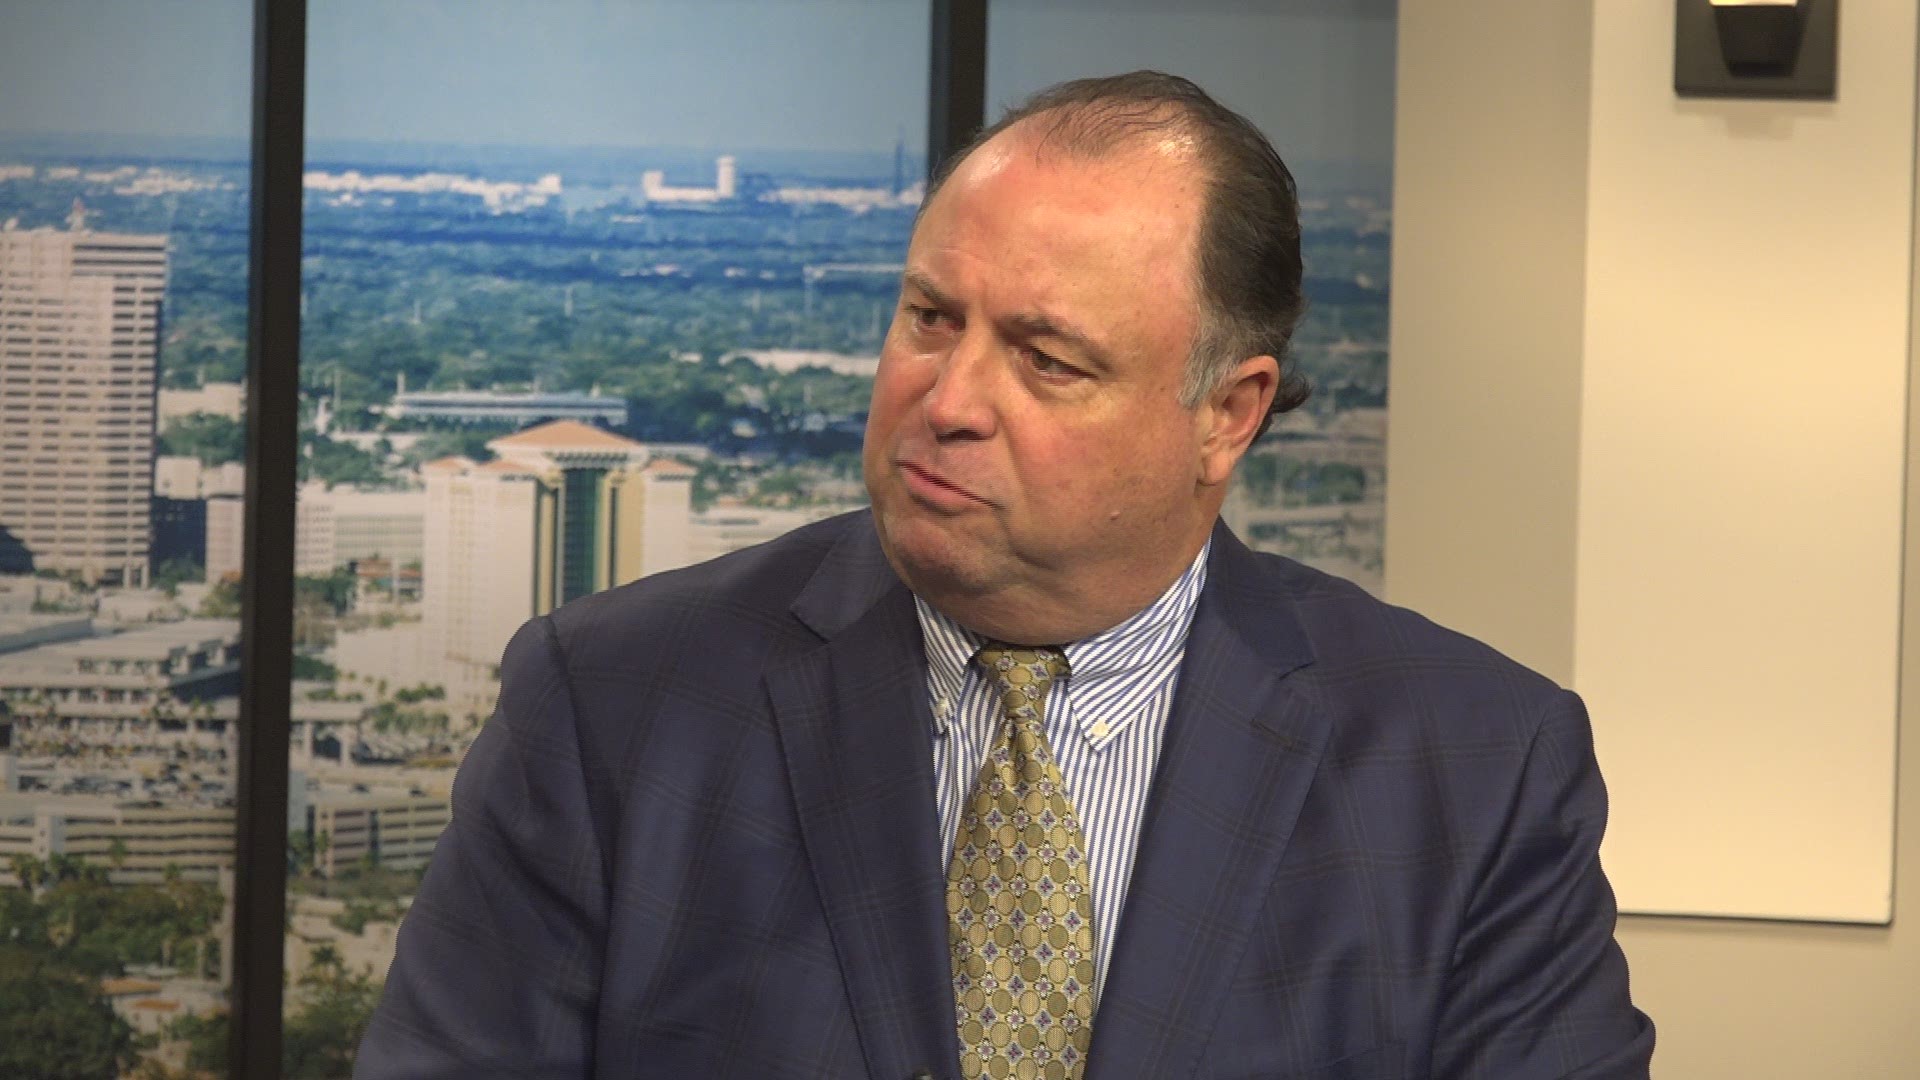 Defense Attorney Jay Hebert weighs in on the case that has reignited a national conversation about Florida's controversial "stand your ground" law.